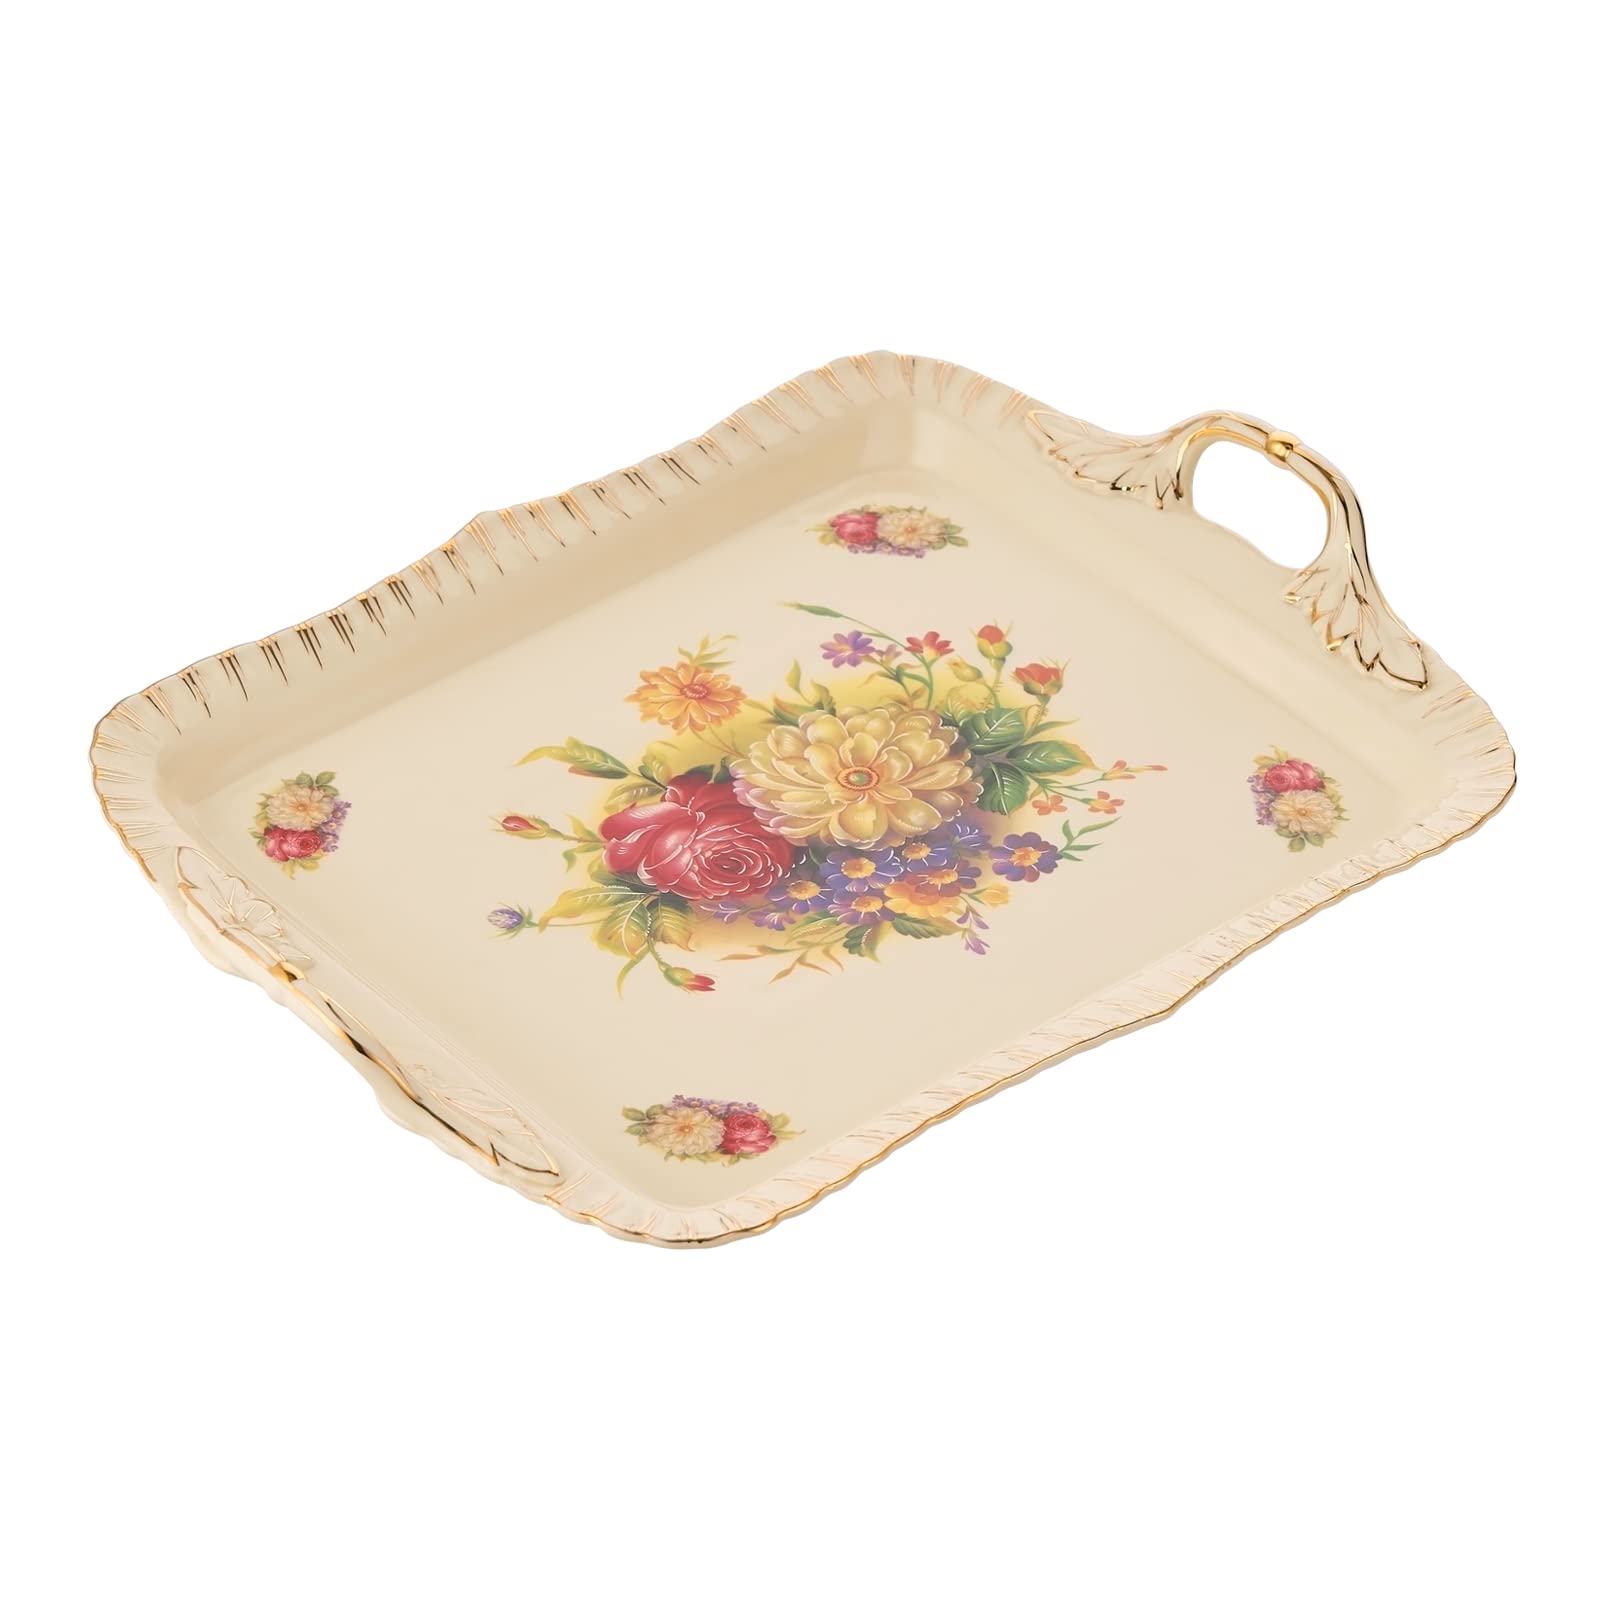 YOLIFE Ivory Serving Tray, Ceramic Floral and Gold Leaves Decorative Platter for Tea Party 15 X 11 inch (Flowering Shrubs)